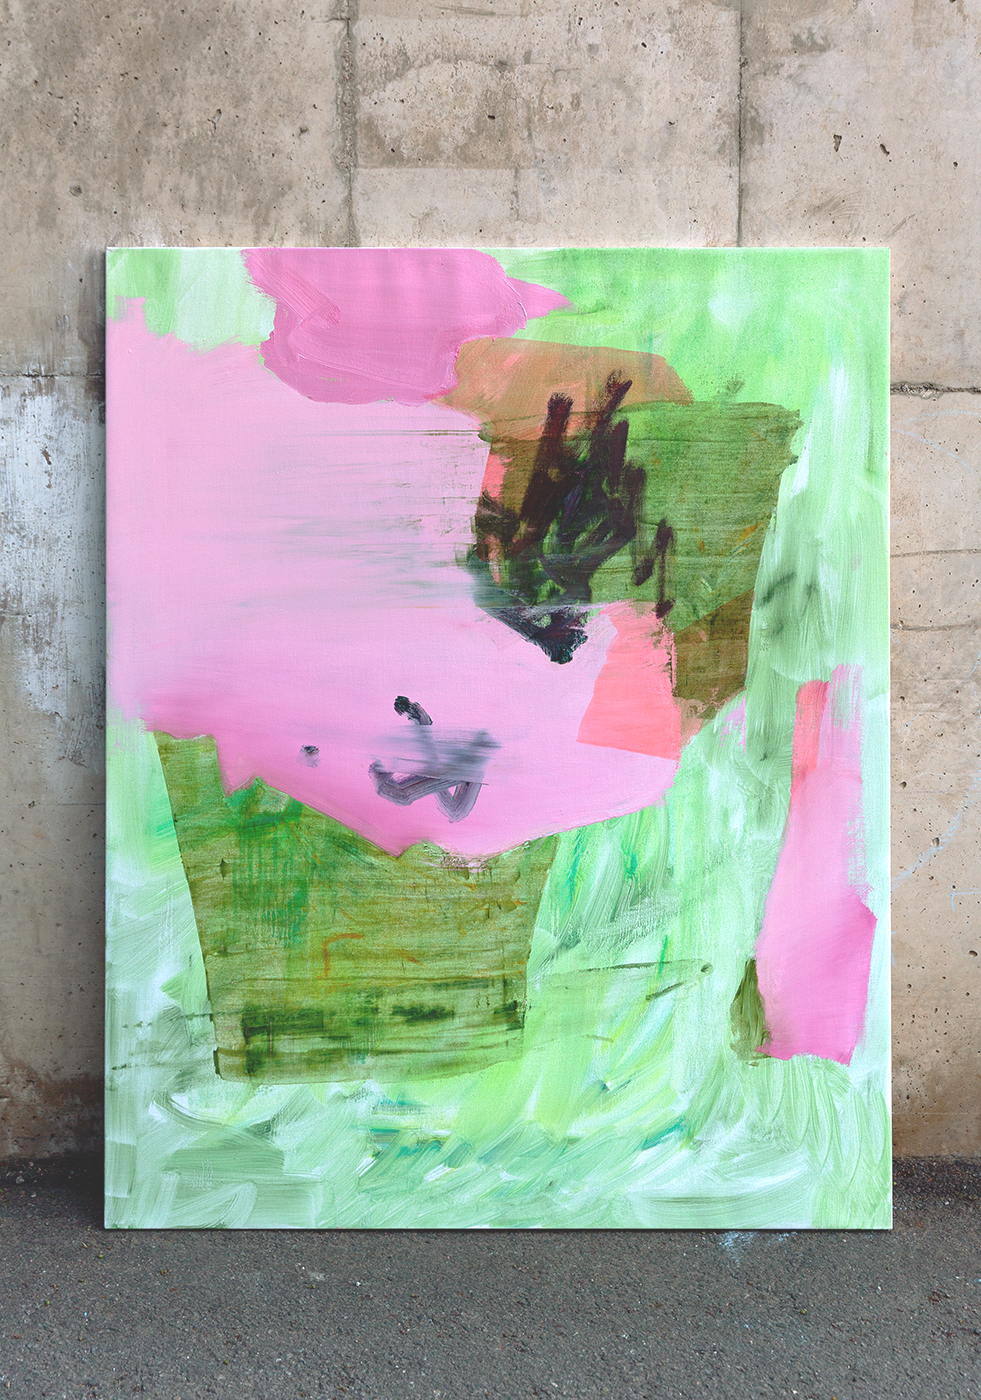 An abstract oil painting in greens and pinks, third in a series of three